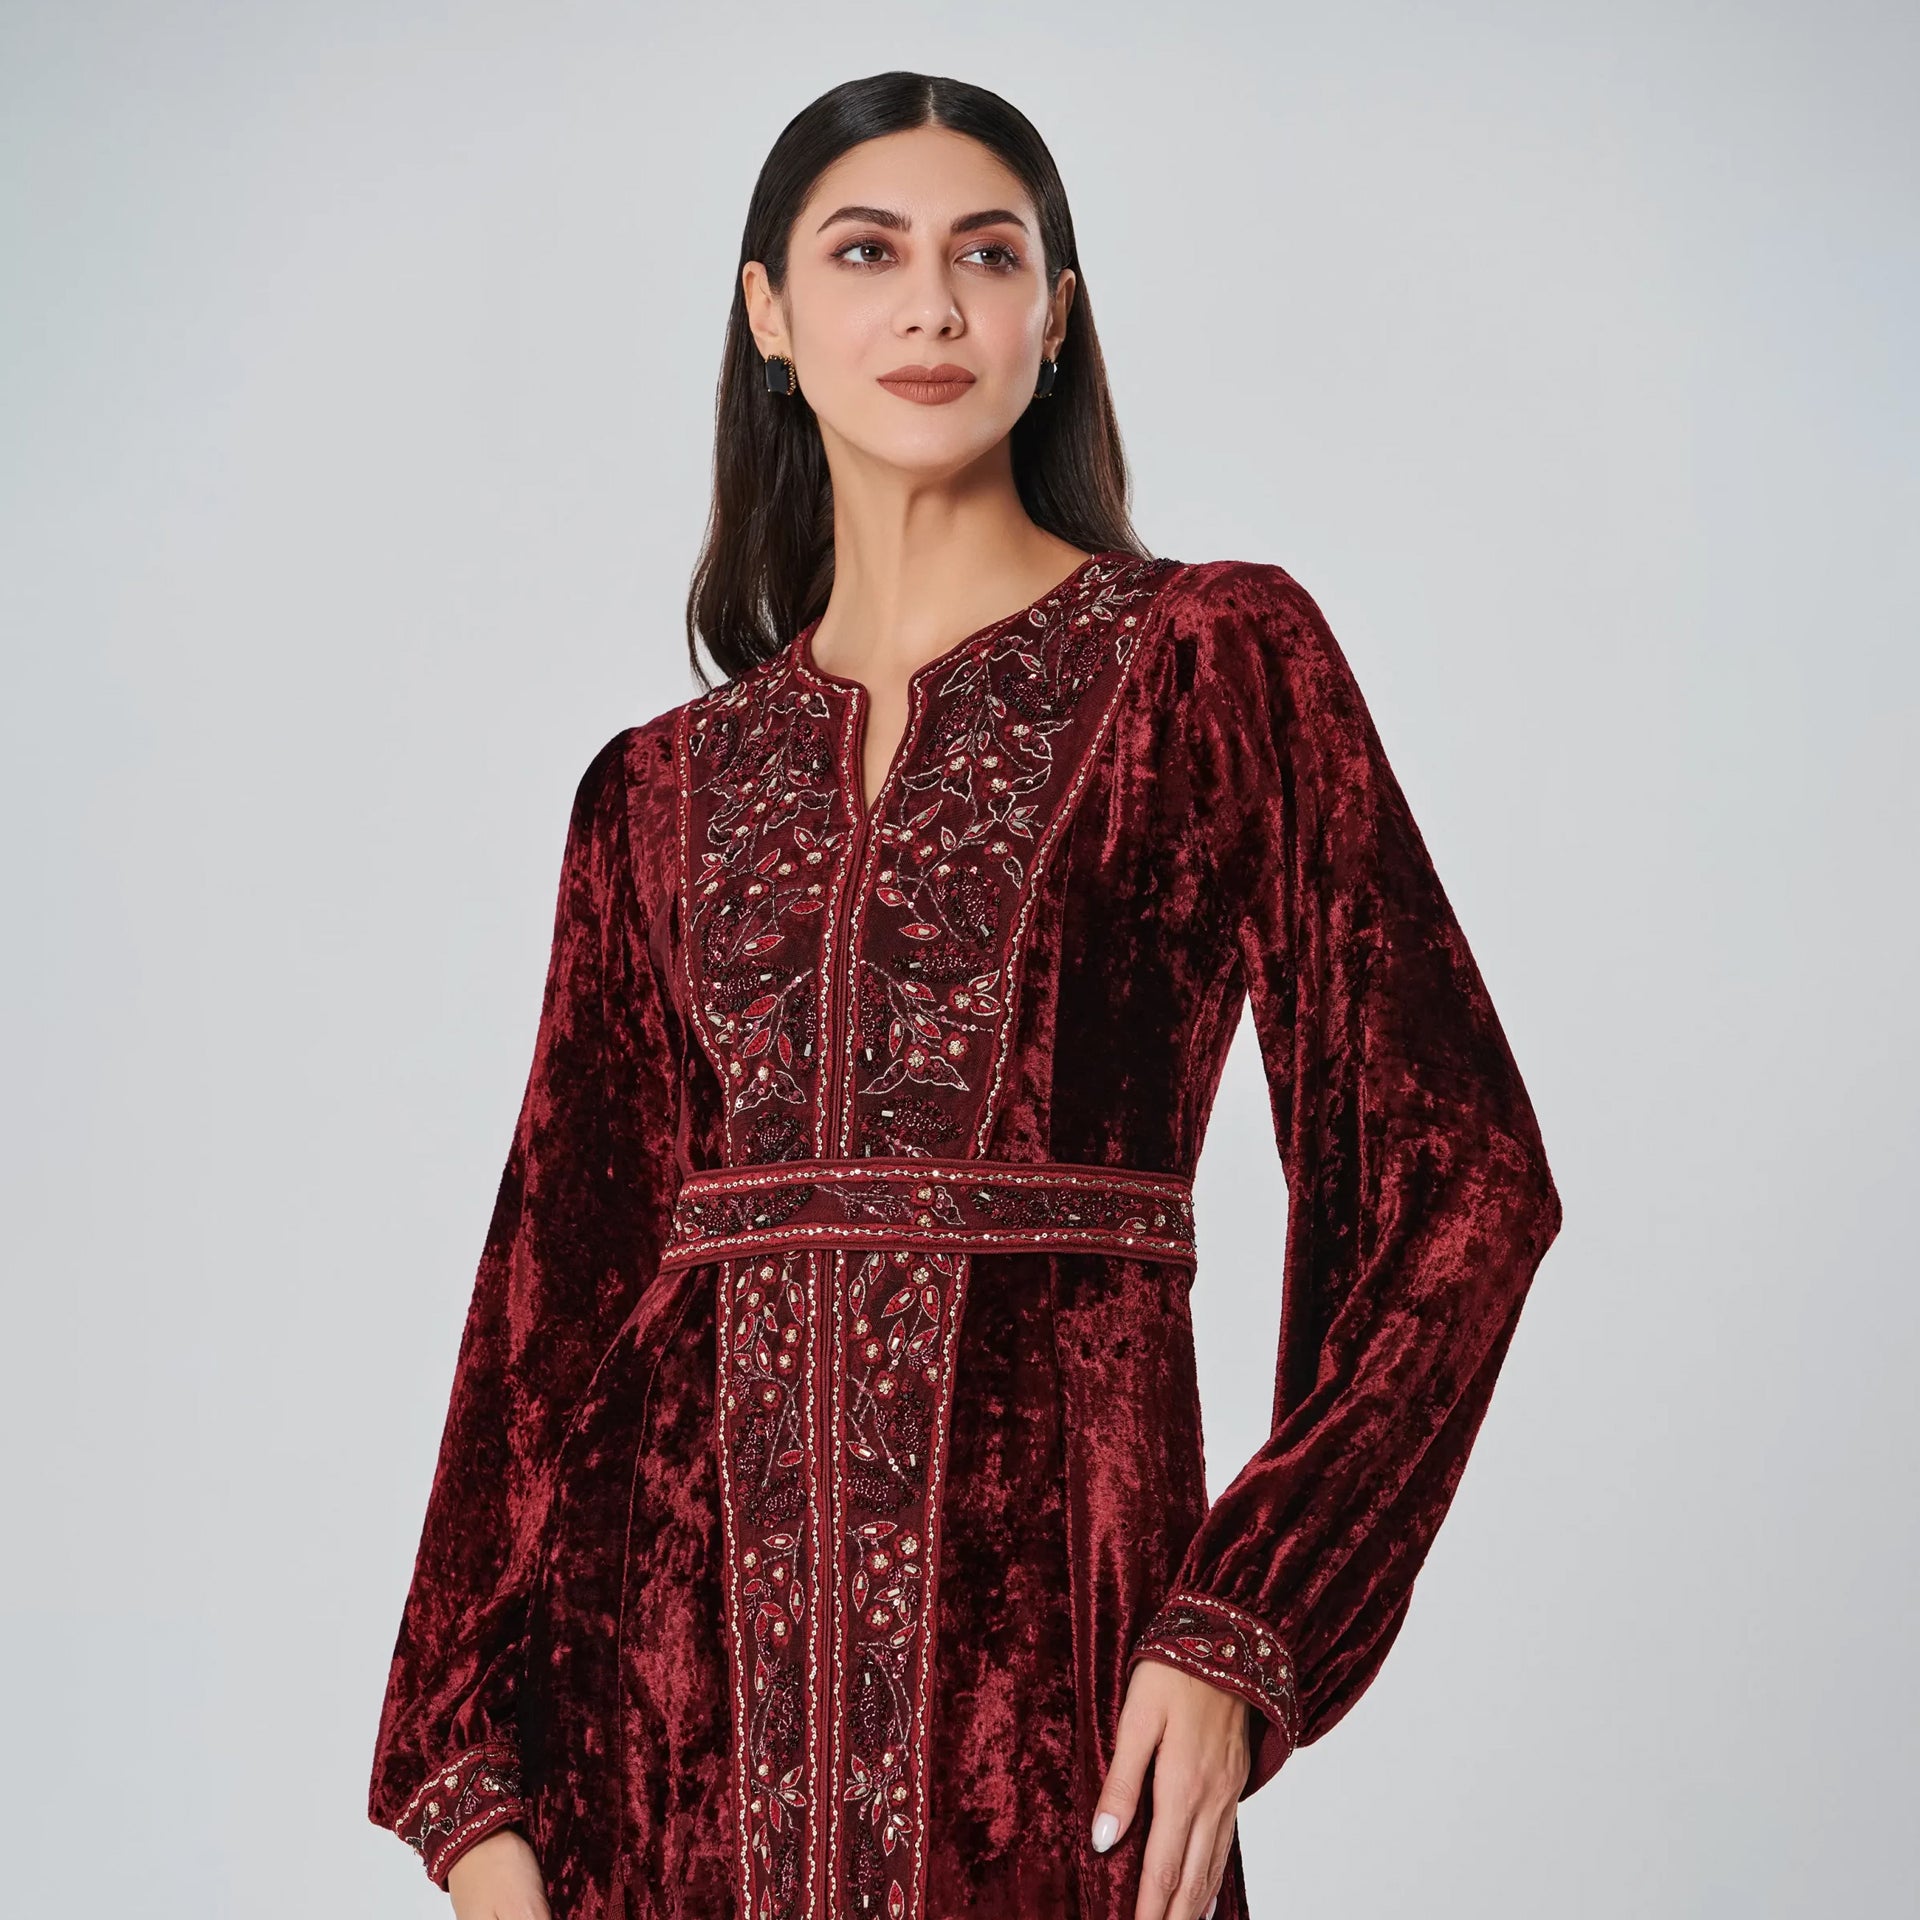 Brown Velvet Nolaya Dress With Long Sleeves And Gold Embroidery From Shalky